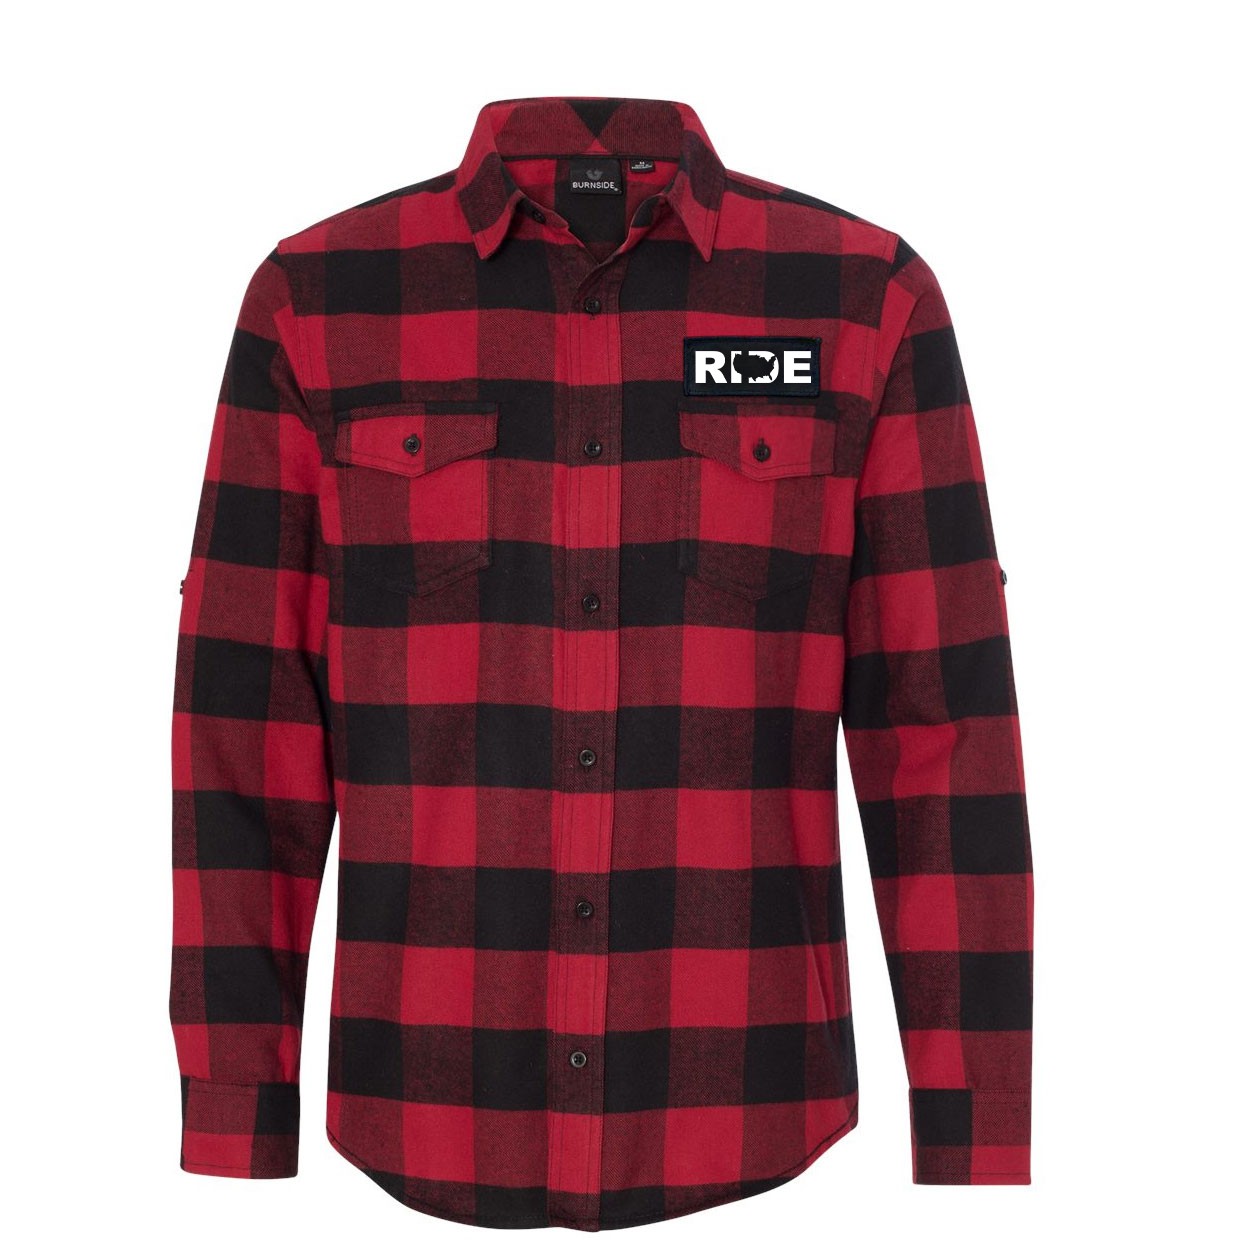 Ride United States Classic Unisex Long Sleeve Woven Patch Flannel Shirt Red/Black Buffalo (White Logo)